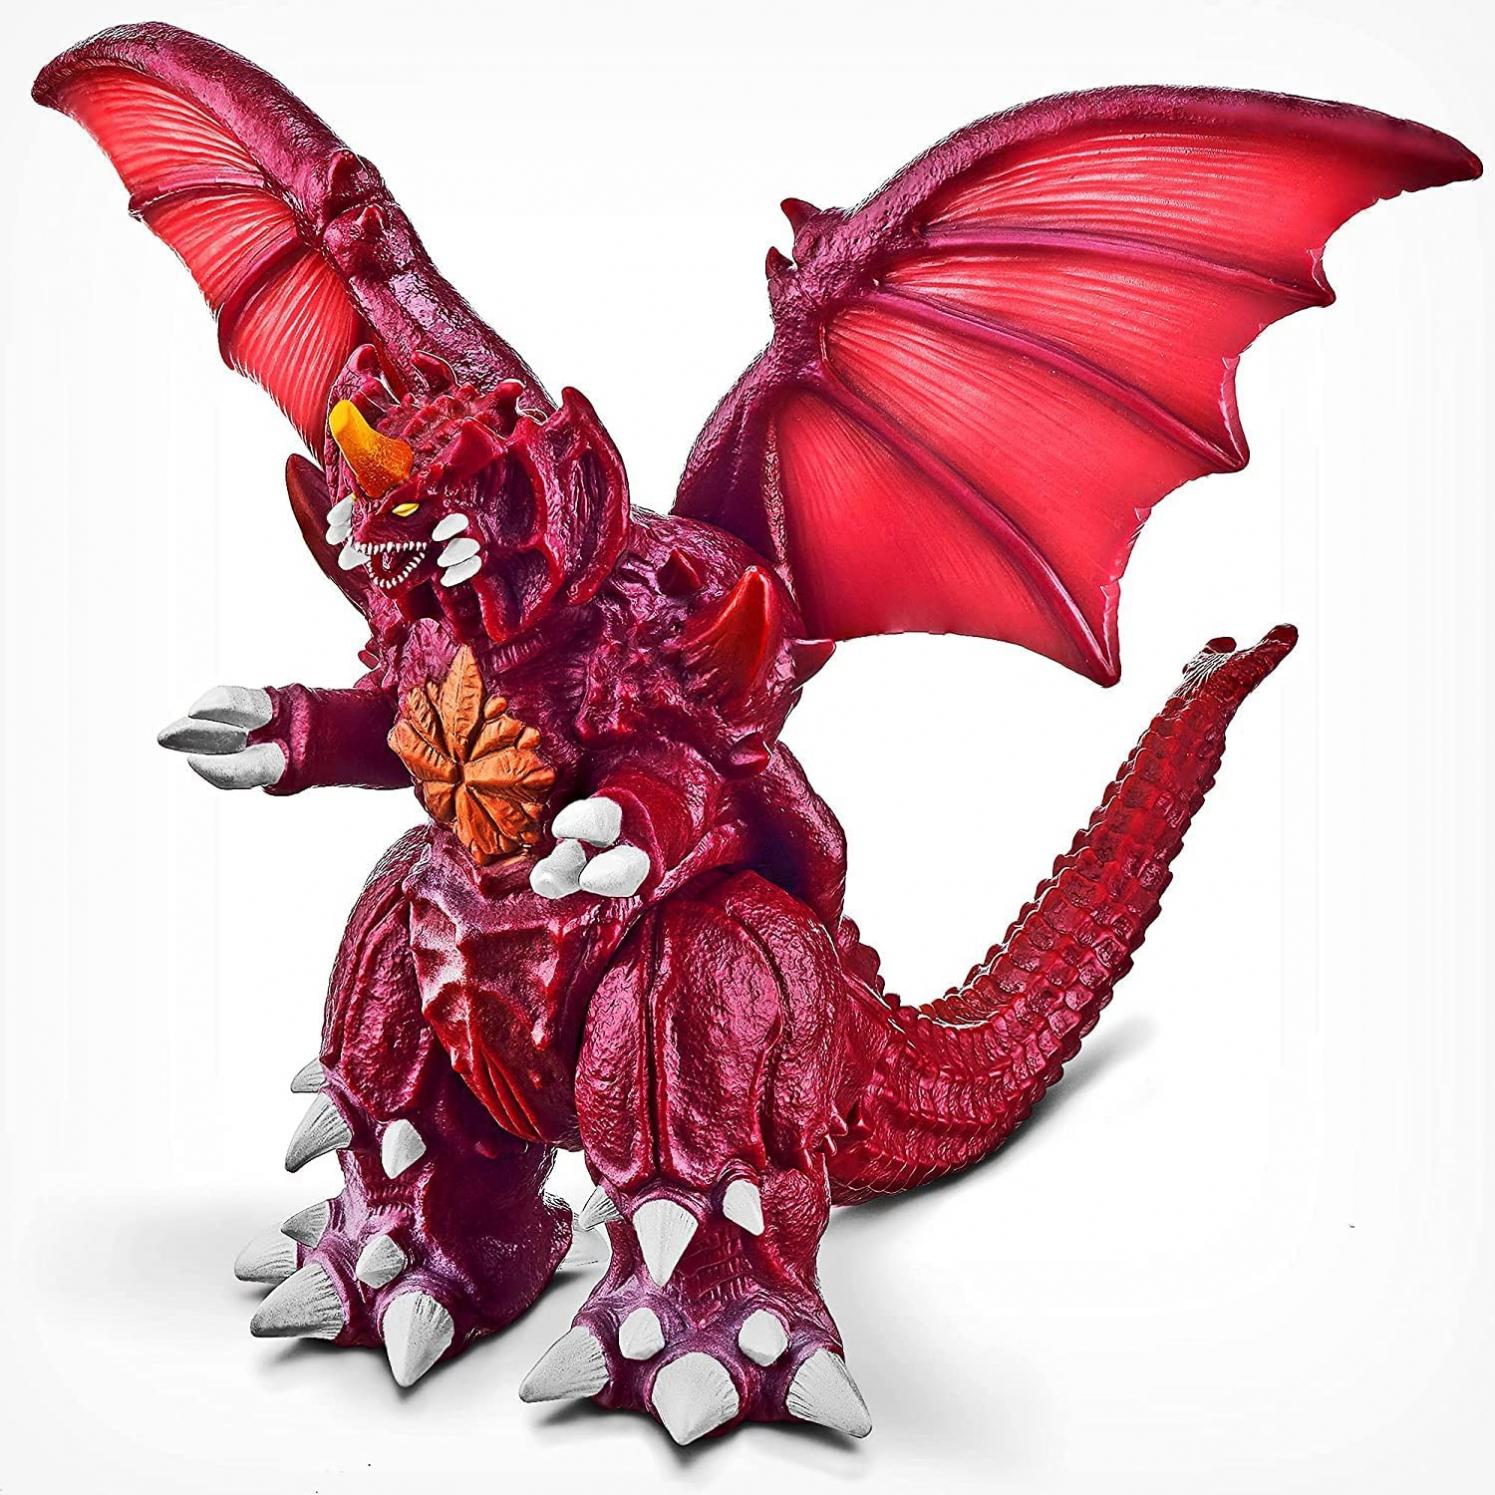 New Destroyah Movie Action Figure - Dragon Monster Toy Size 8’’ Carry Bag Included